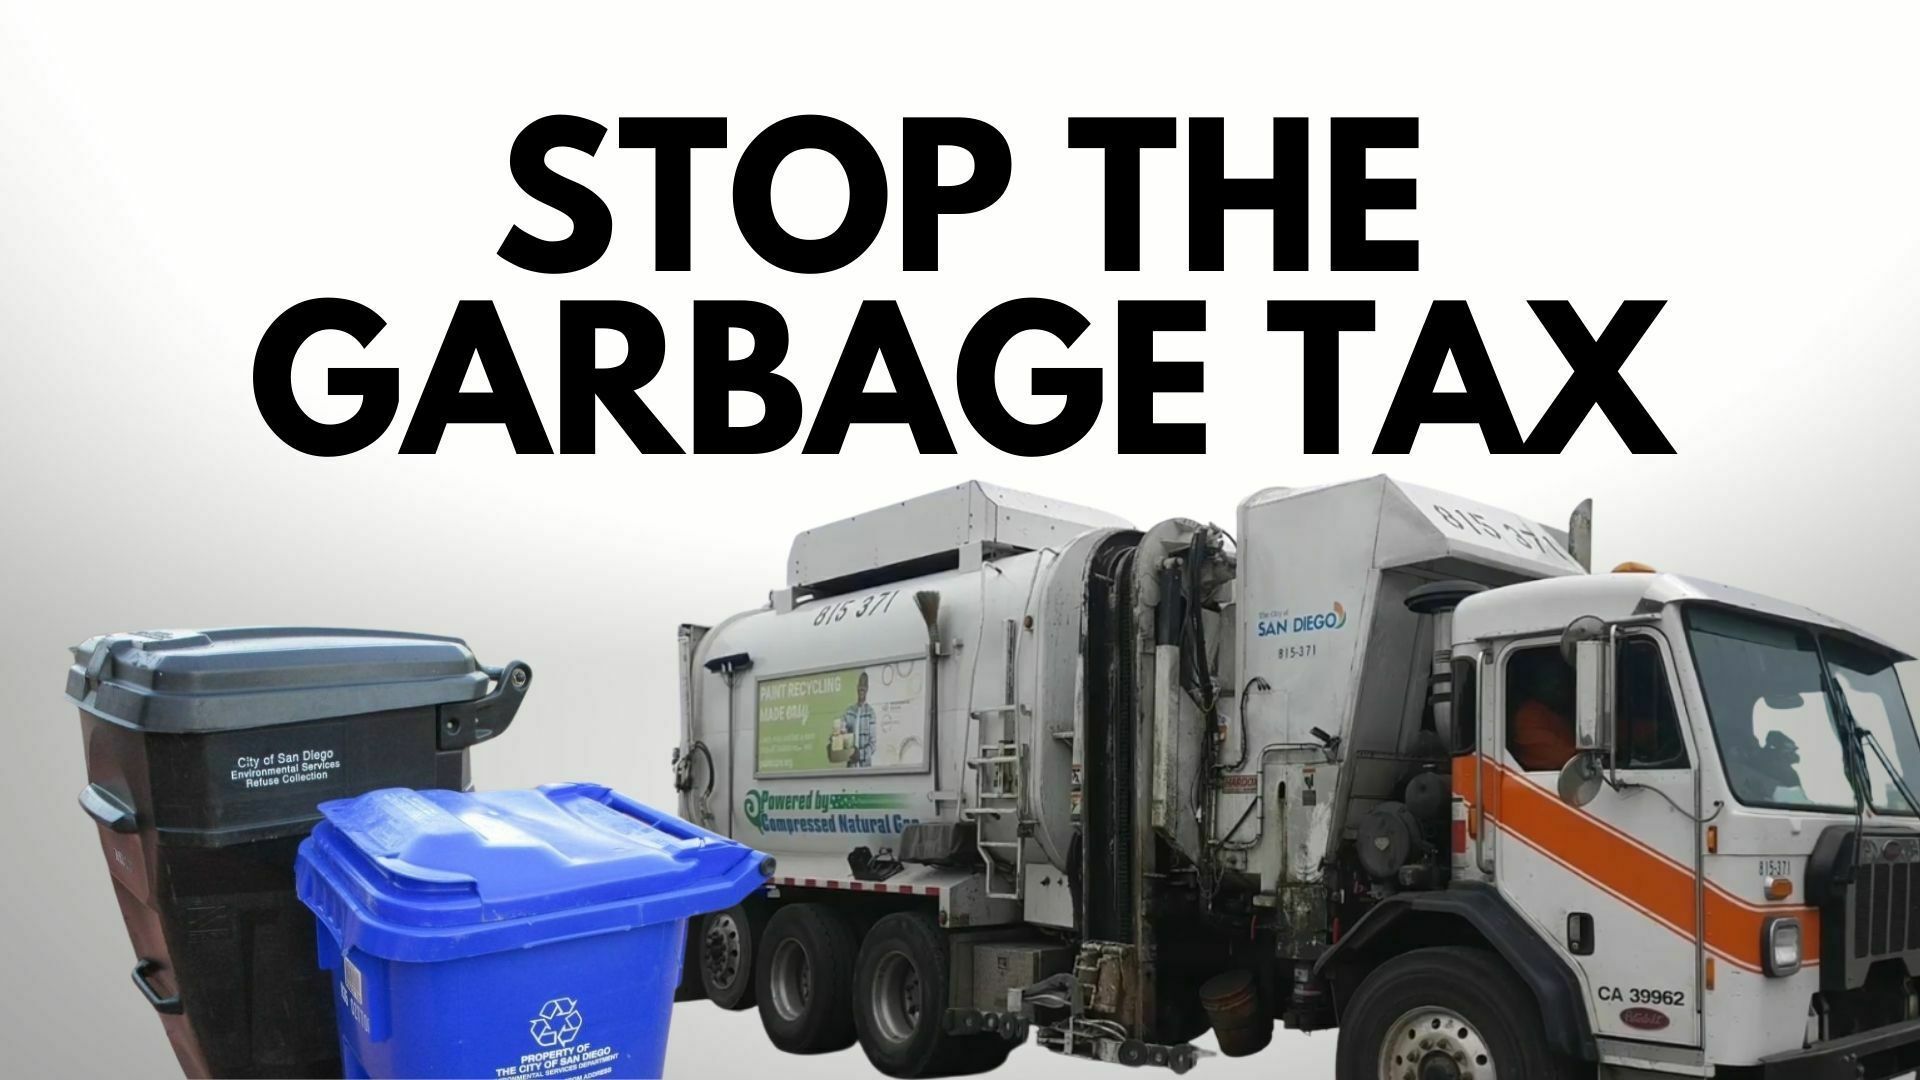 Stop the garbage tax